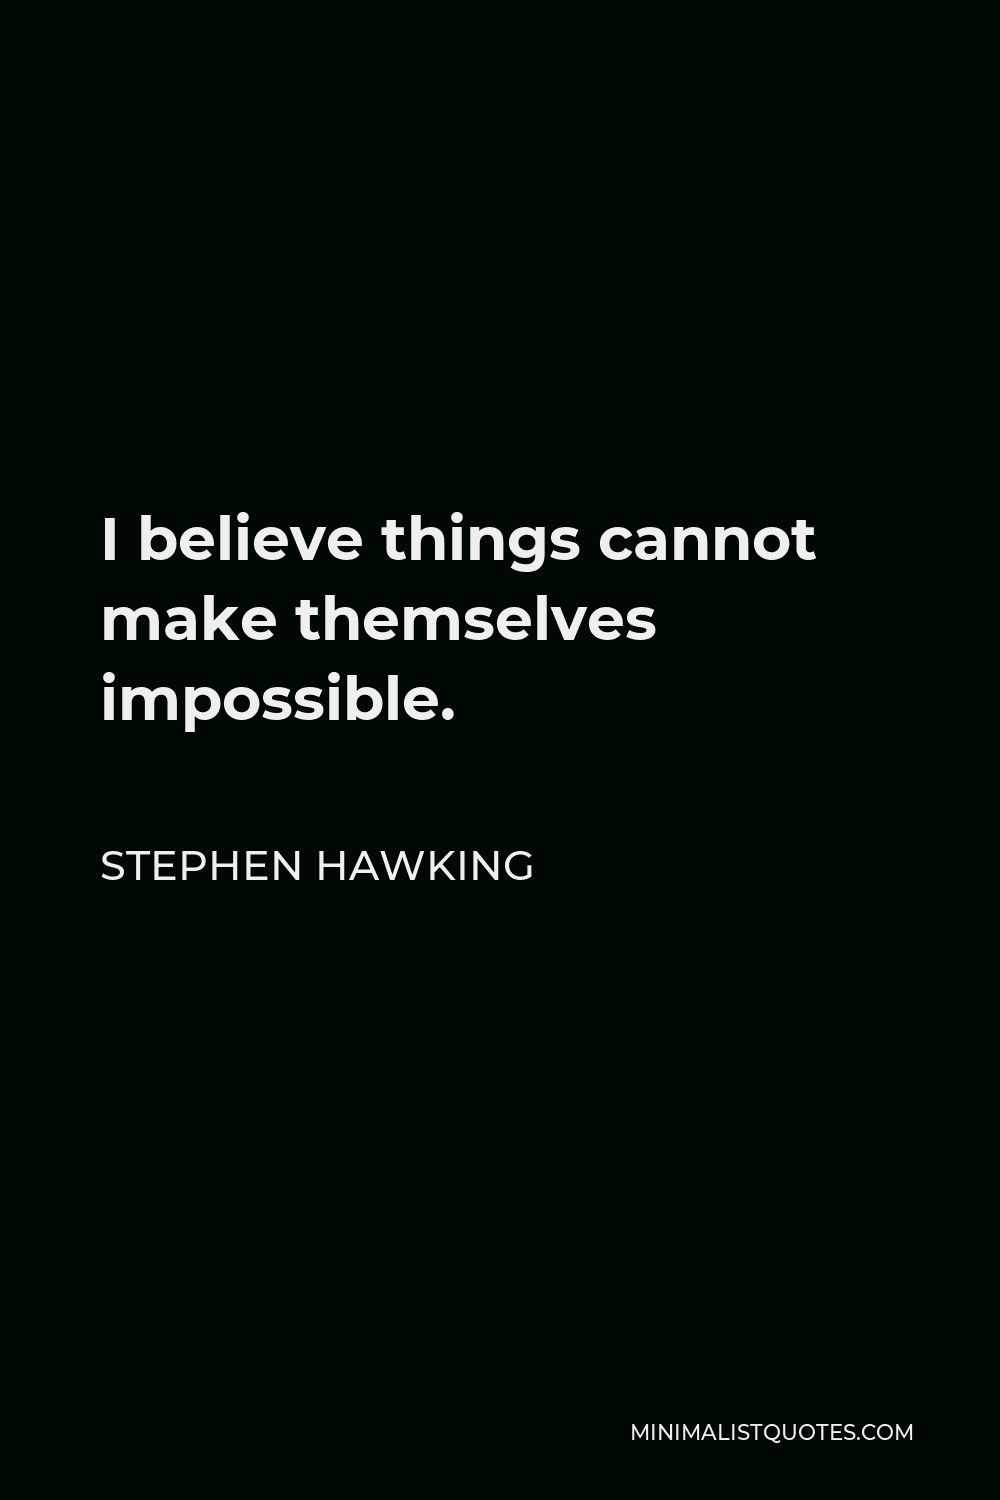 Stephen Hawking Quote - I believe things cannot make themselves impossible.